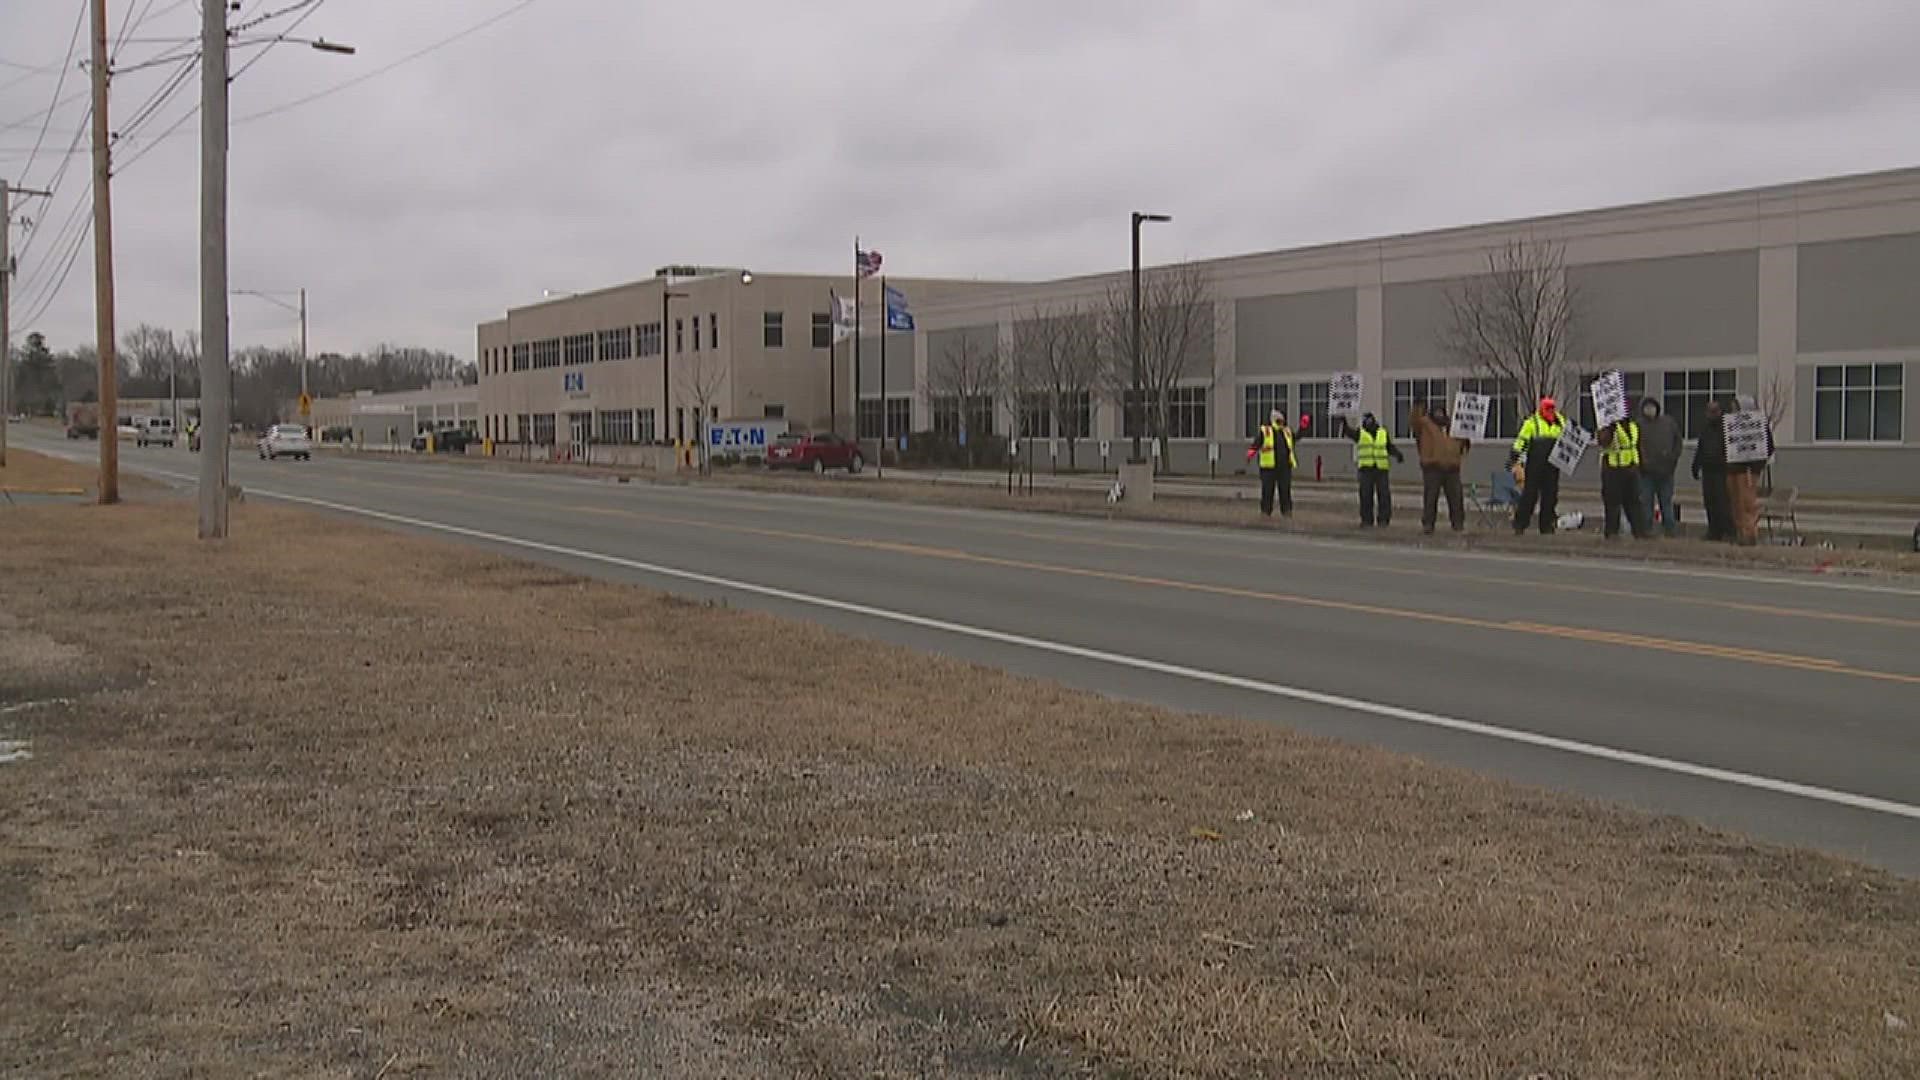 IAM officials say a new contract offer was unattainable after two days of negotiations. Roughly 365 union members remain on strike against Eaton Corporation.